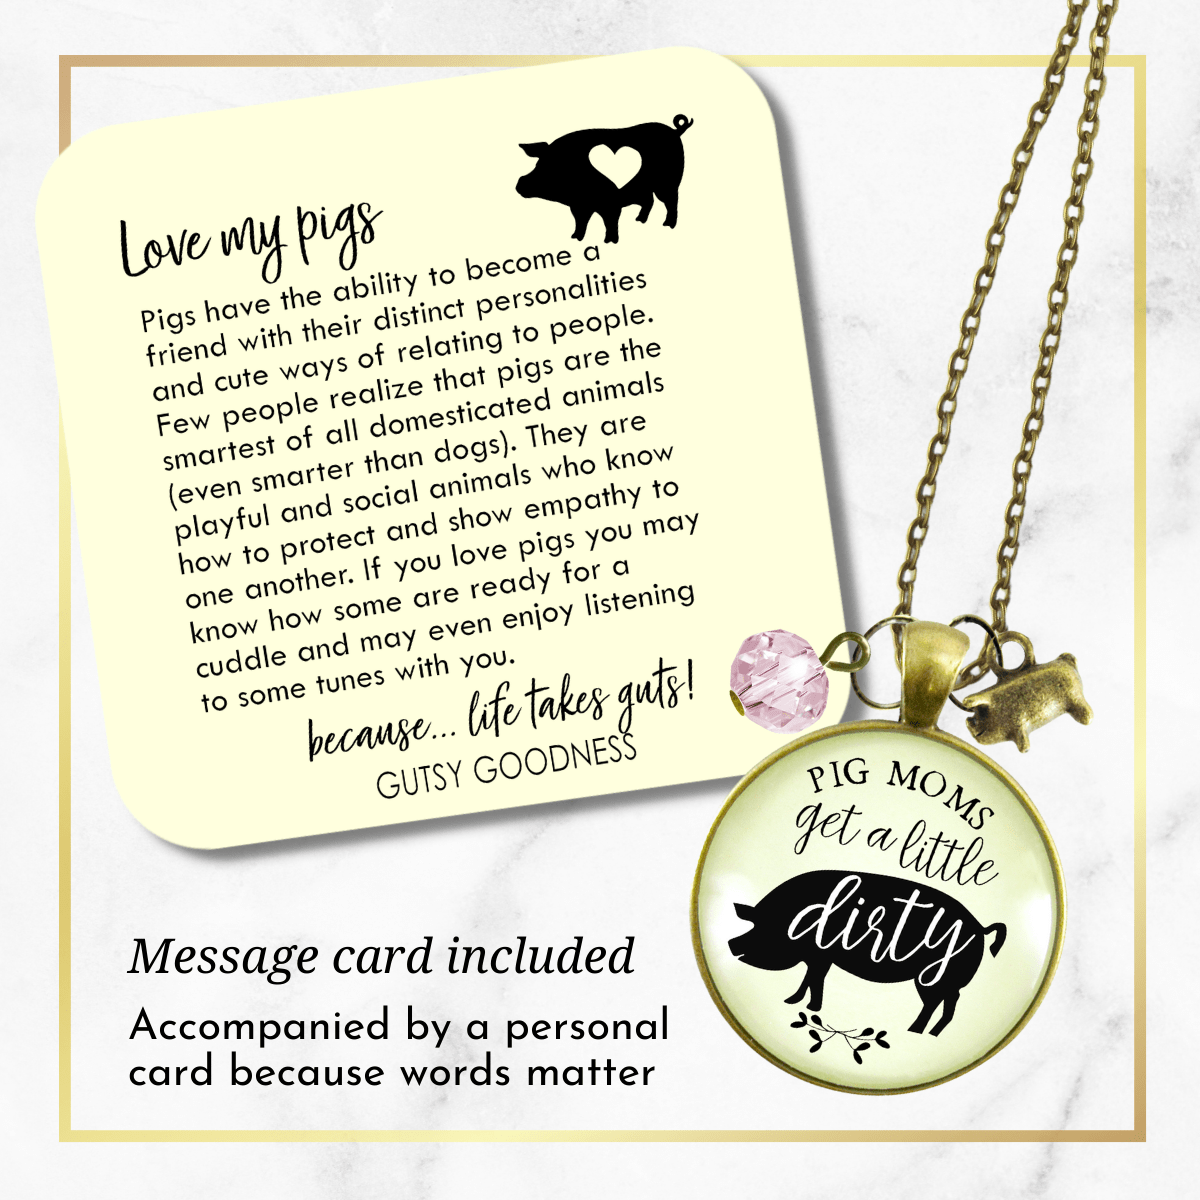 Gutsy Goodness Pig Necklace Quote Pig Moms Get Dirty Sassy Country Girl Jewelry - Gutsy Goodness;Pig Necklace Quote Pig Moms Get Dirty Sassy Country Girl Jewelry - Gutsy Goodness Handmade Jewelry Gifts